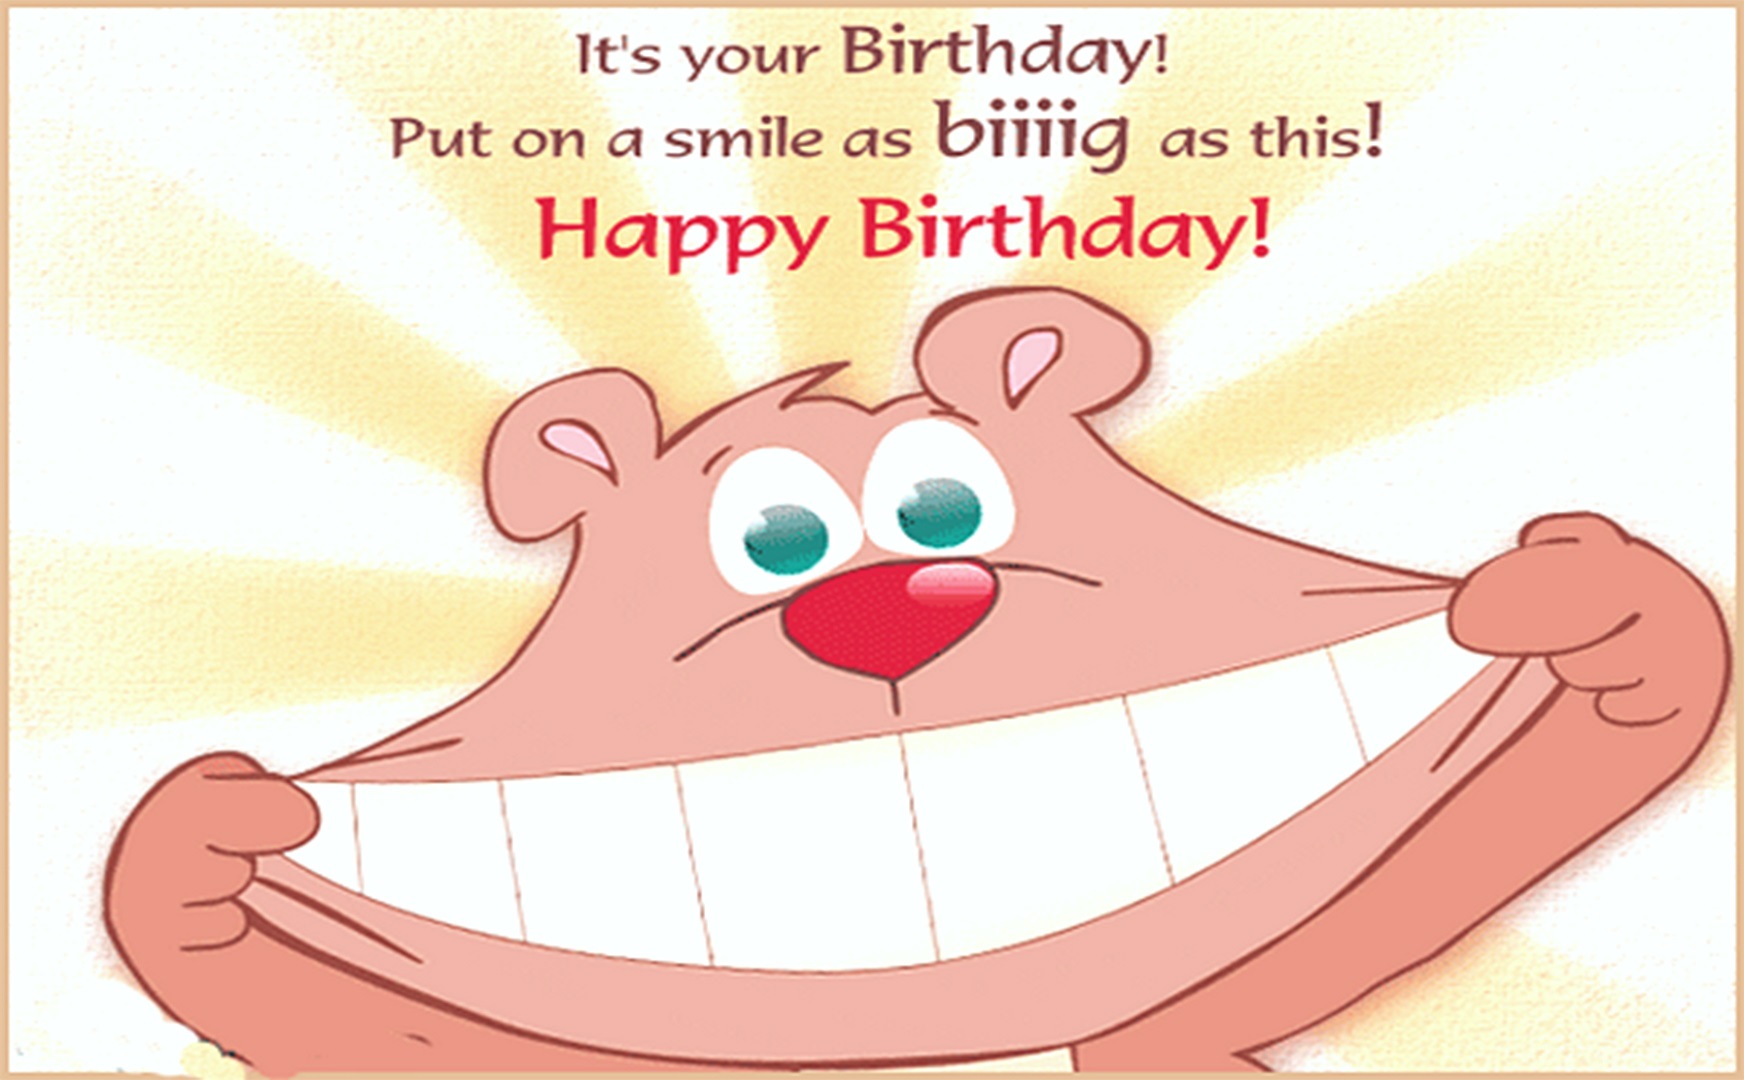 Funny Happy Birthday Images & Pictures | Funny Birthday Wishes